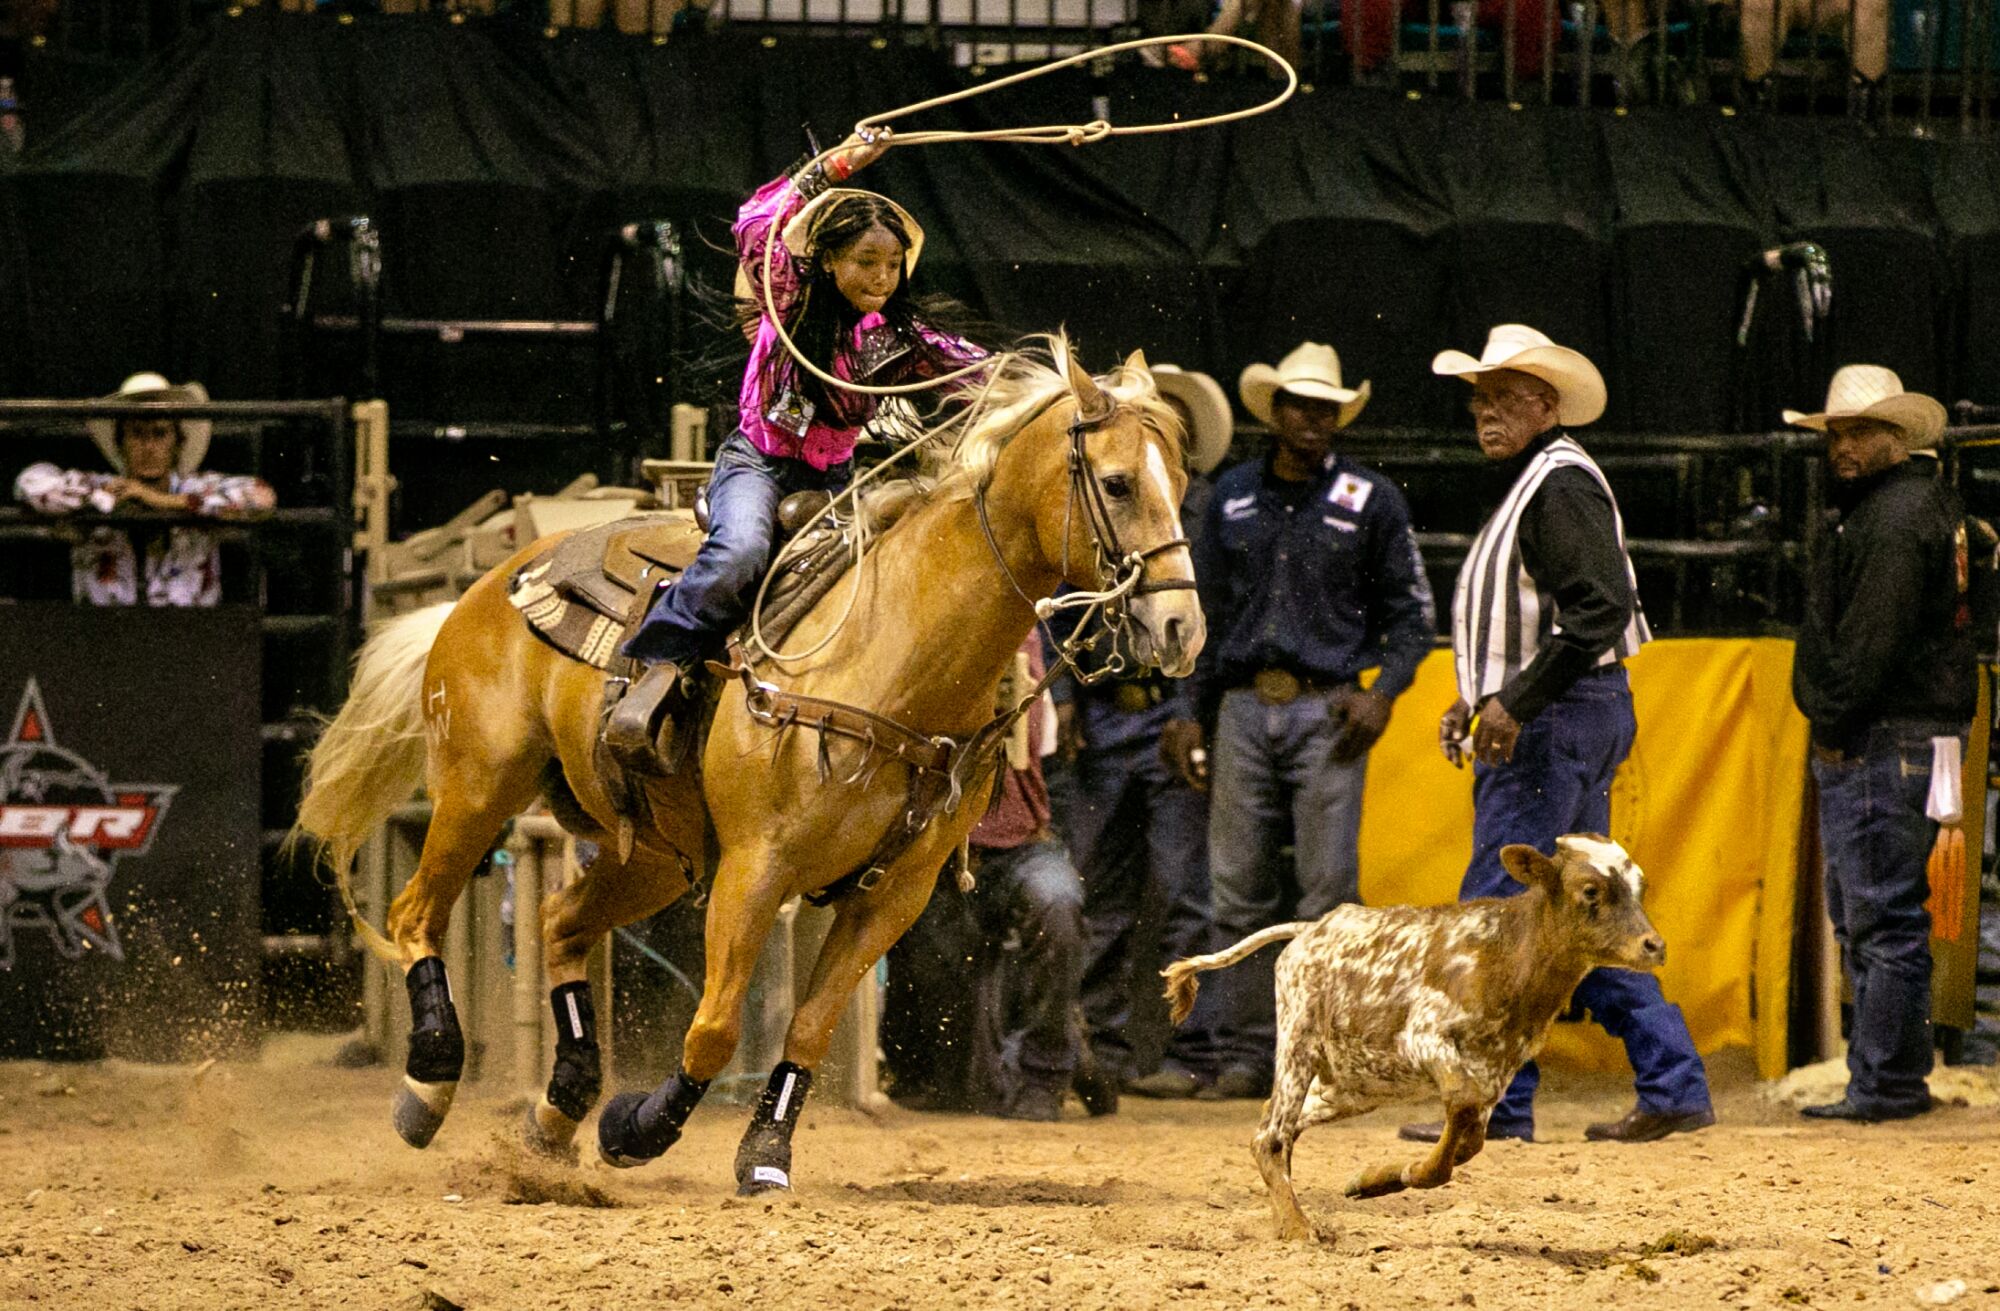 A girl on a horse attempts to lasso a running calf as adults in cowboy hats look on.